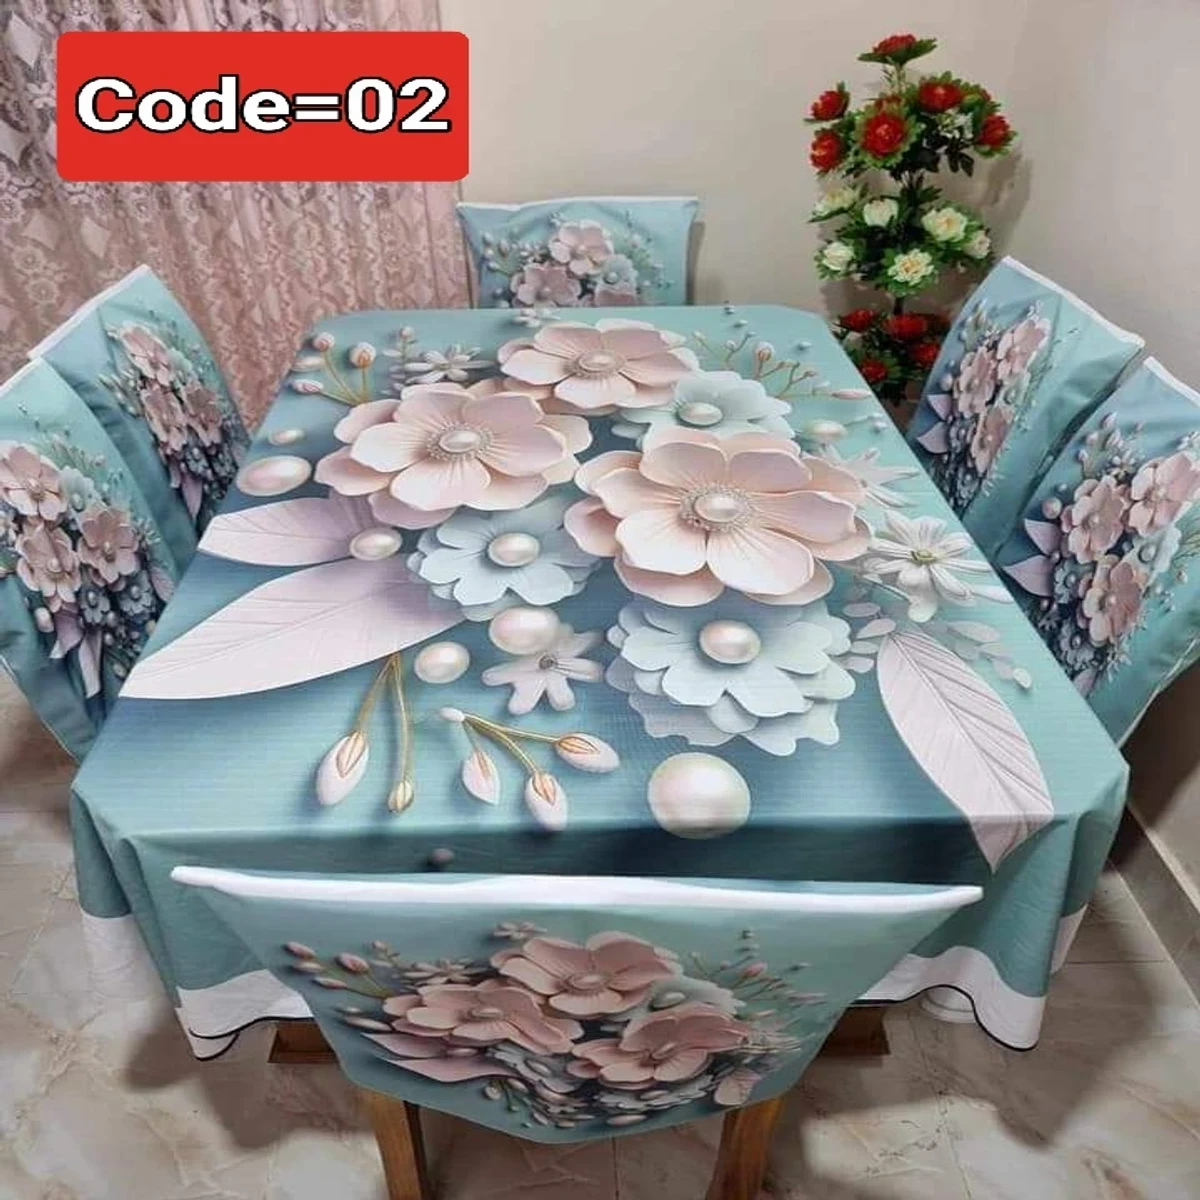 3D Pint Dining Table and Chair Cover Code = 02